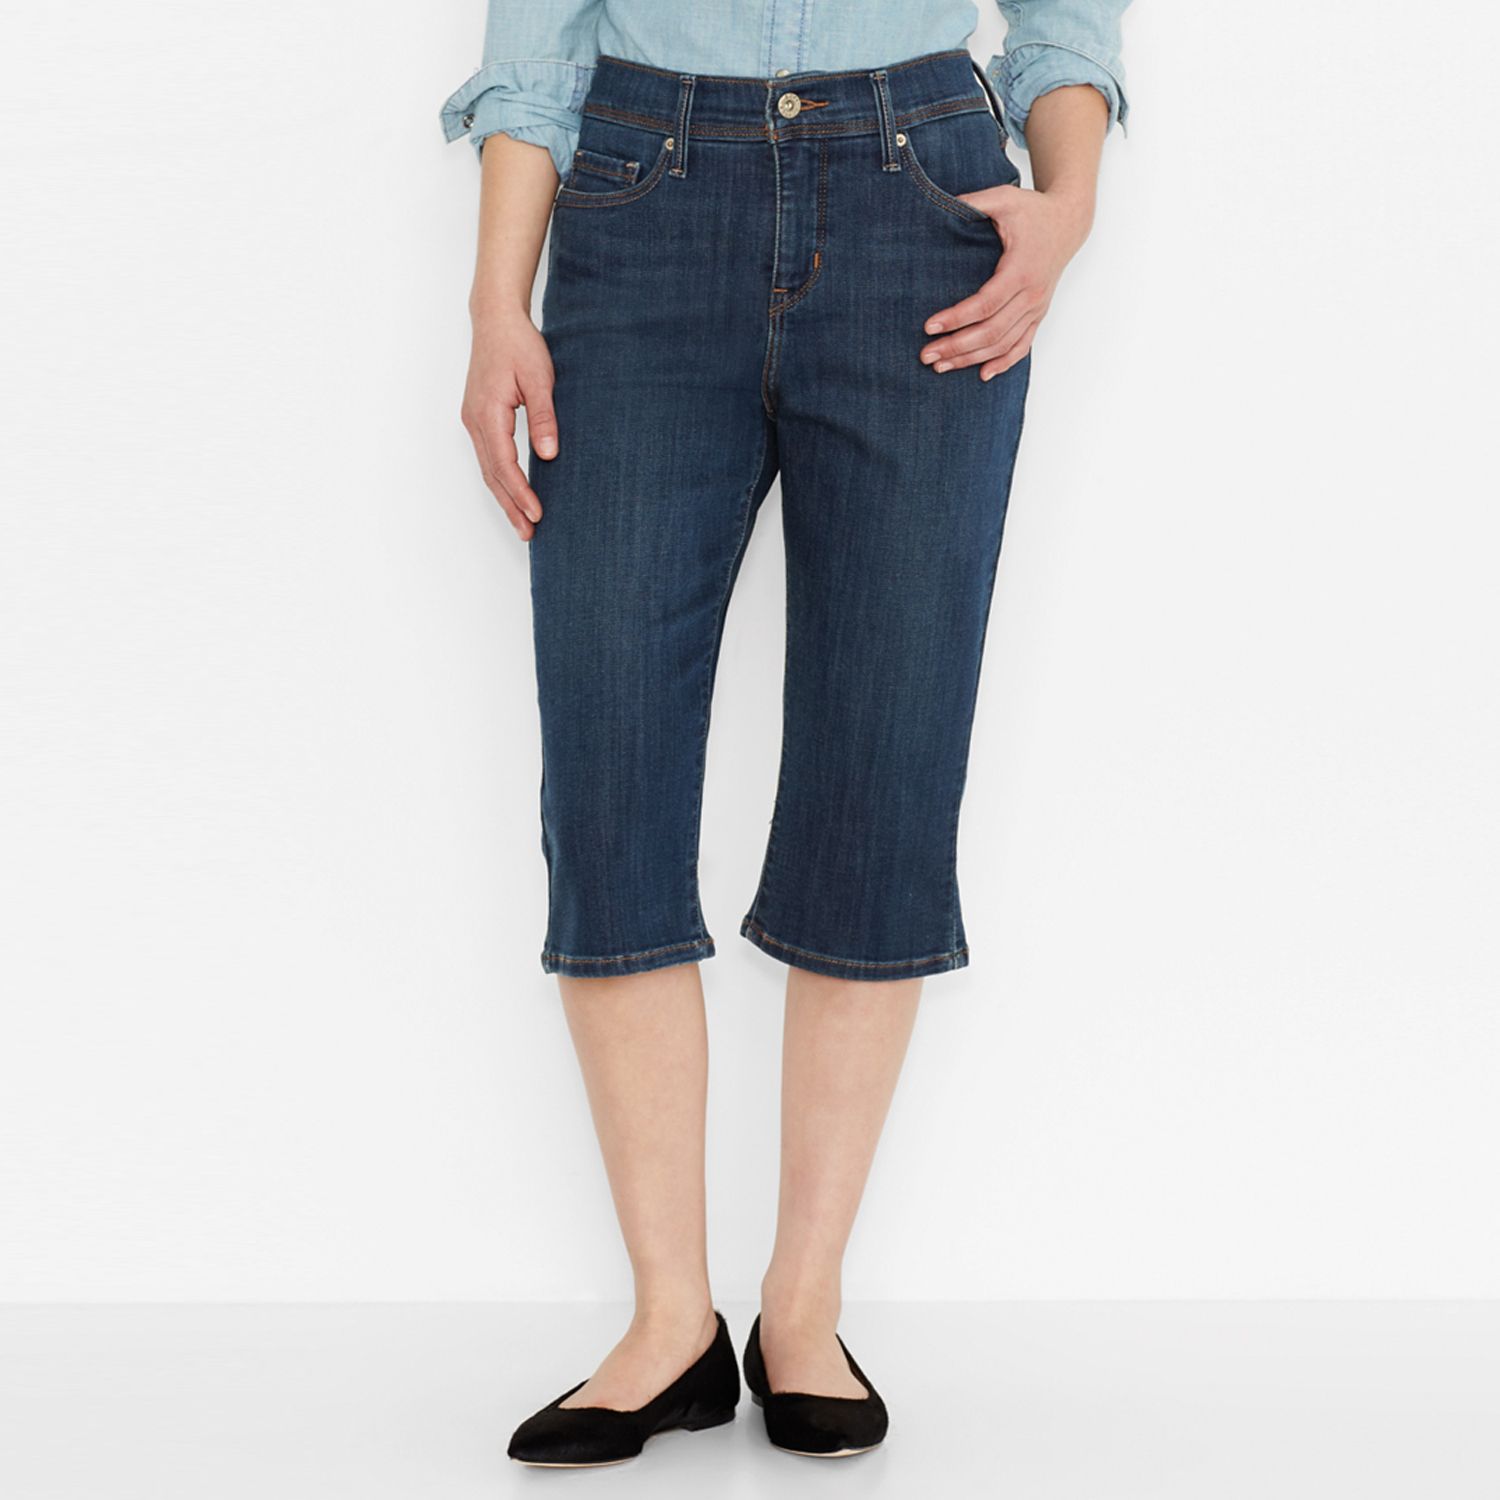 512 Perfectly Slimming Skimmer Jeans